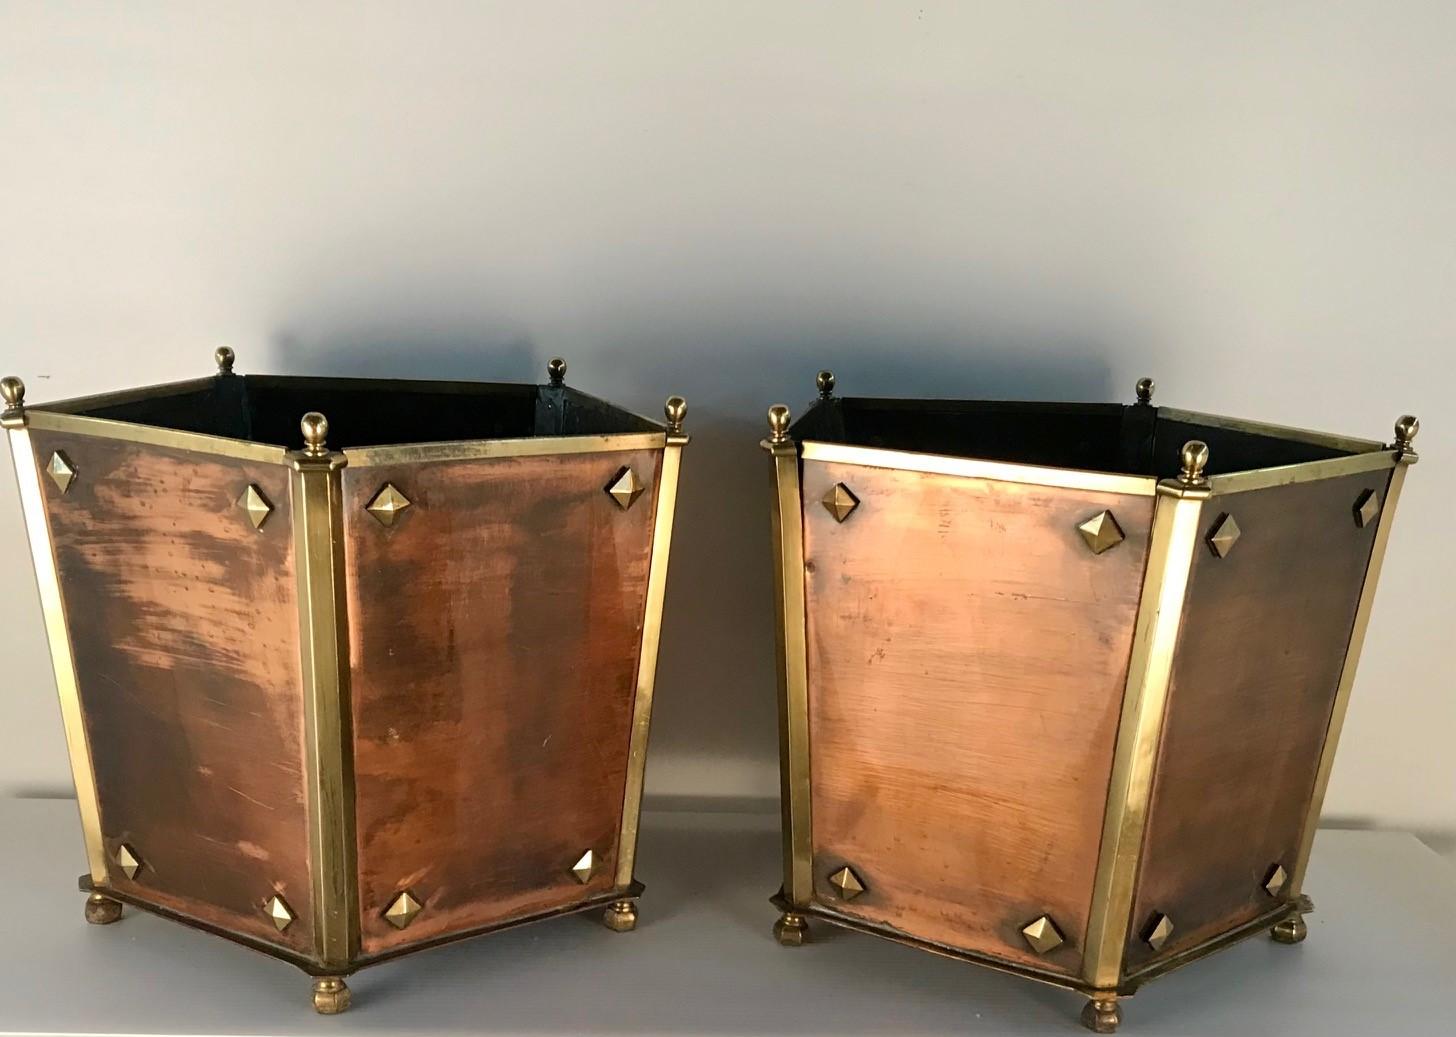 This unique pair of Arts and Crafts jardinières are a great example of the design and craftmanship of the Arts and Crafts movement. These pentagon shaped jardinières have the five copper sides attached at the five angles and are then sheaved in a